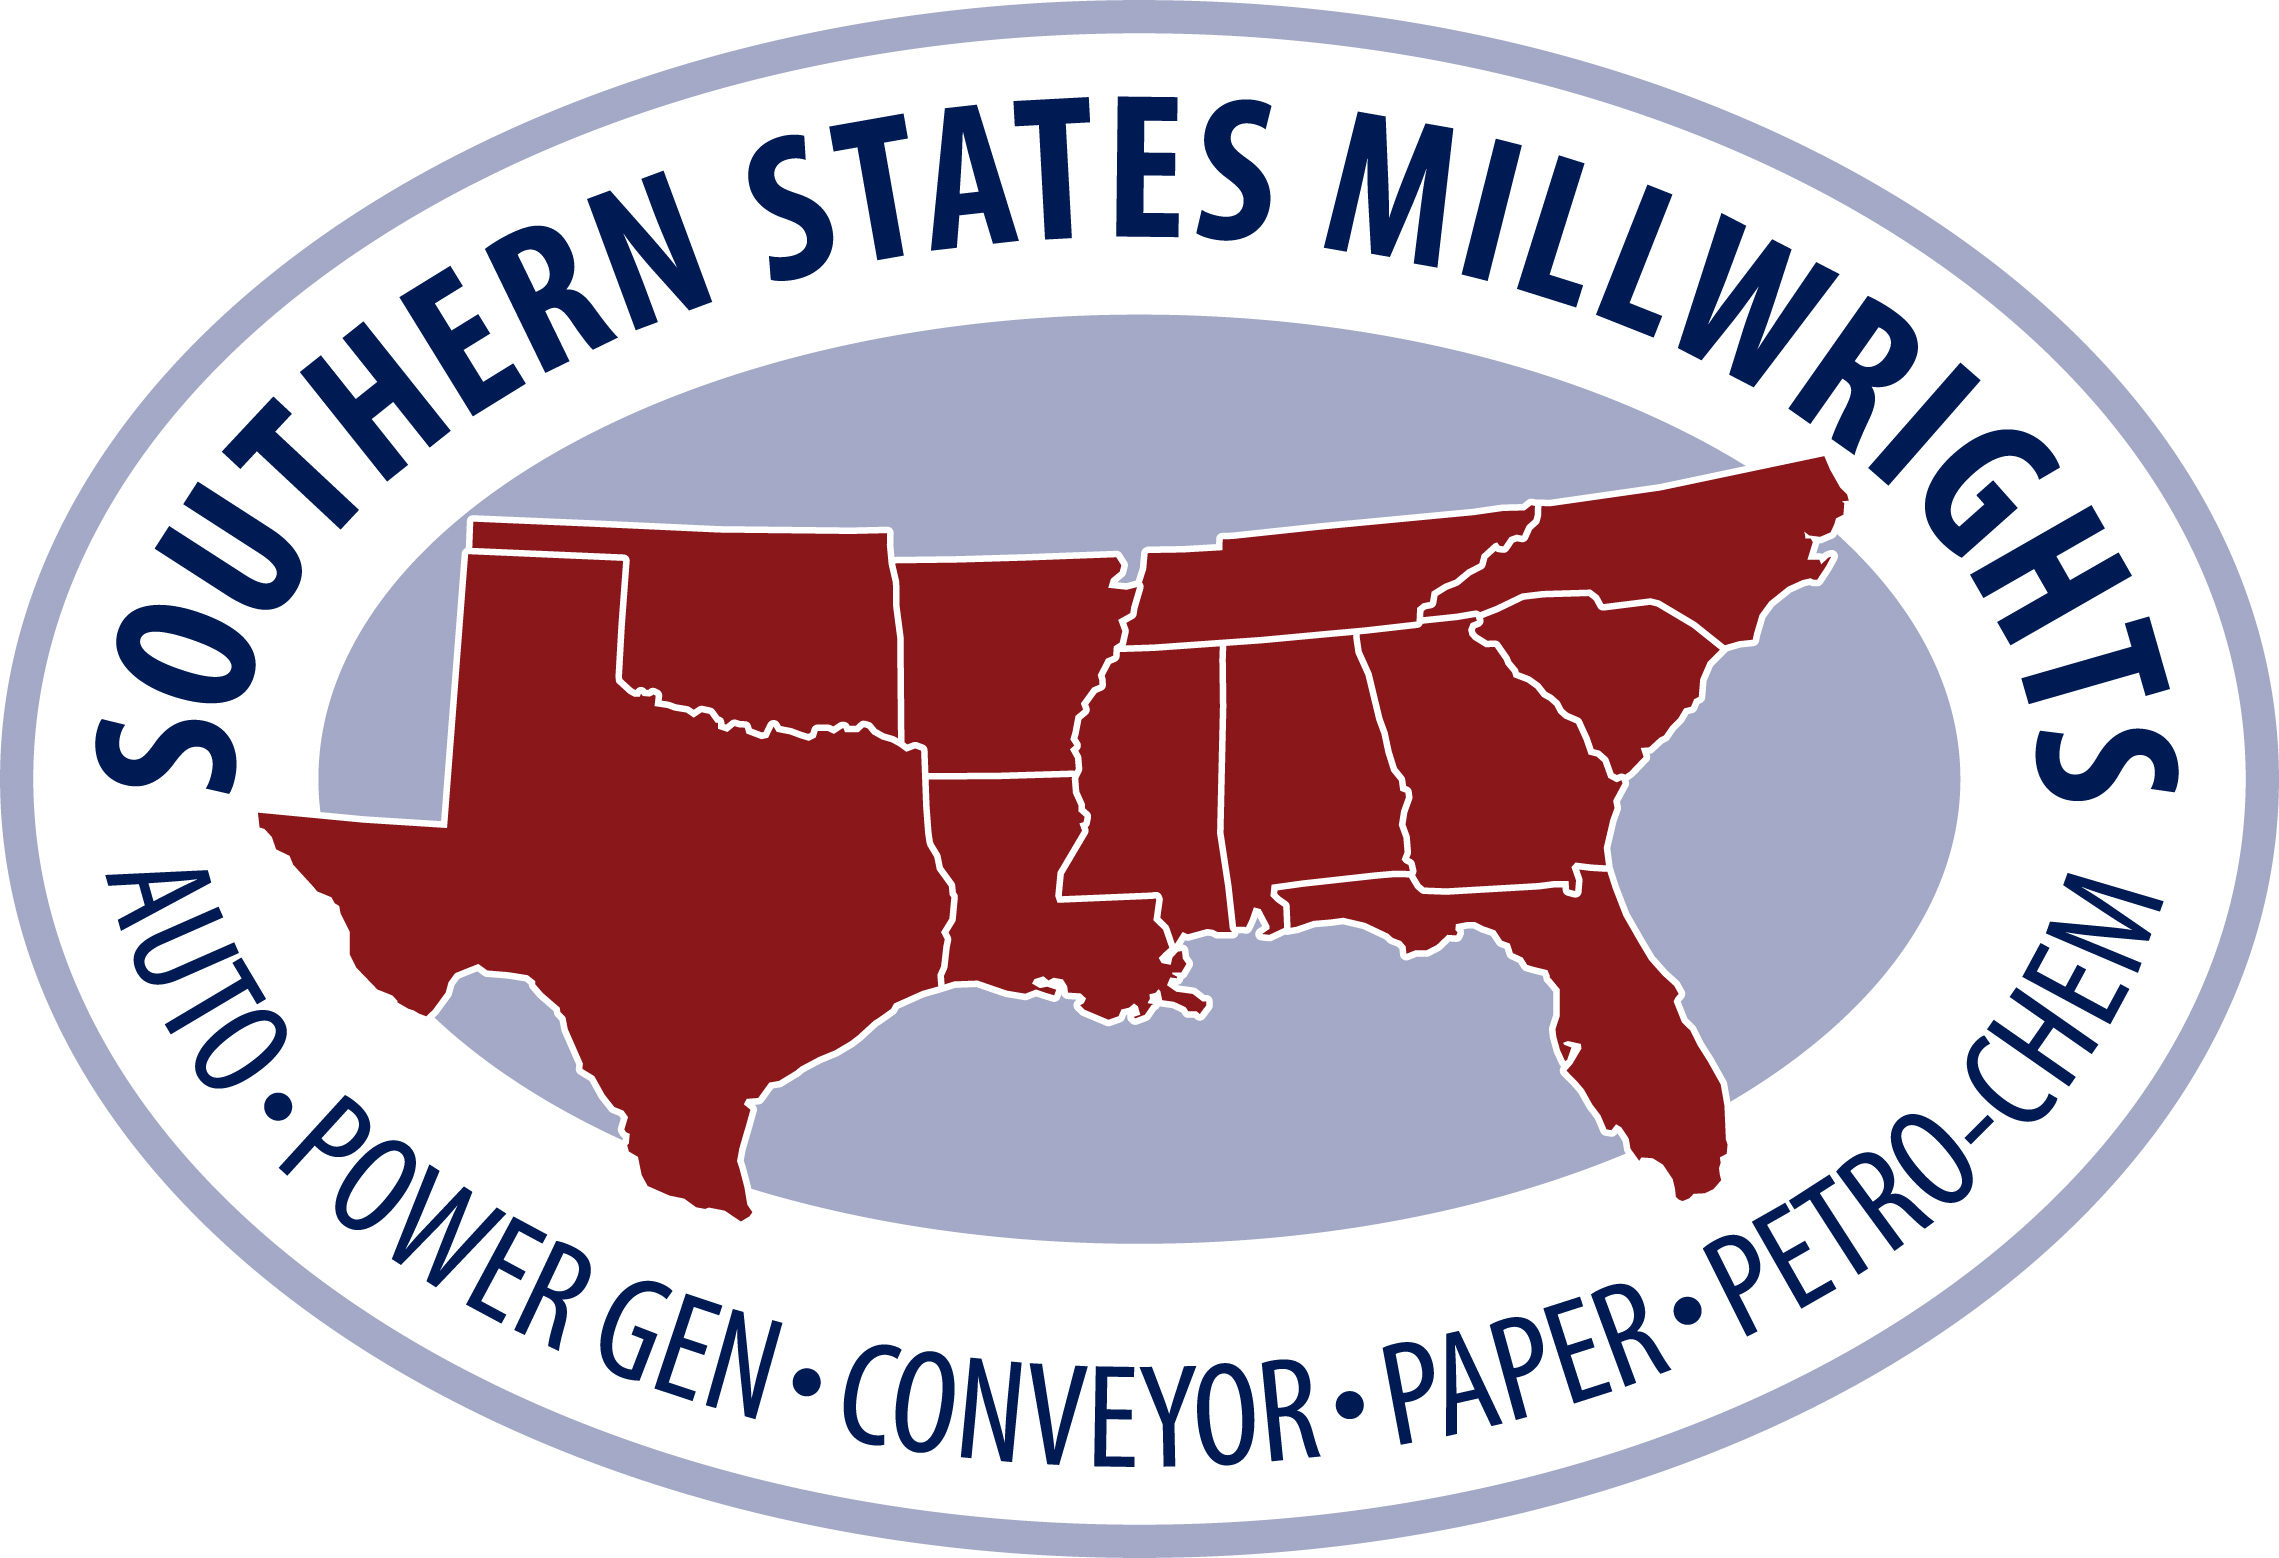 Southern States Millwright Regional Council